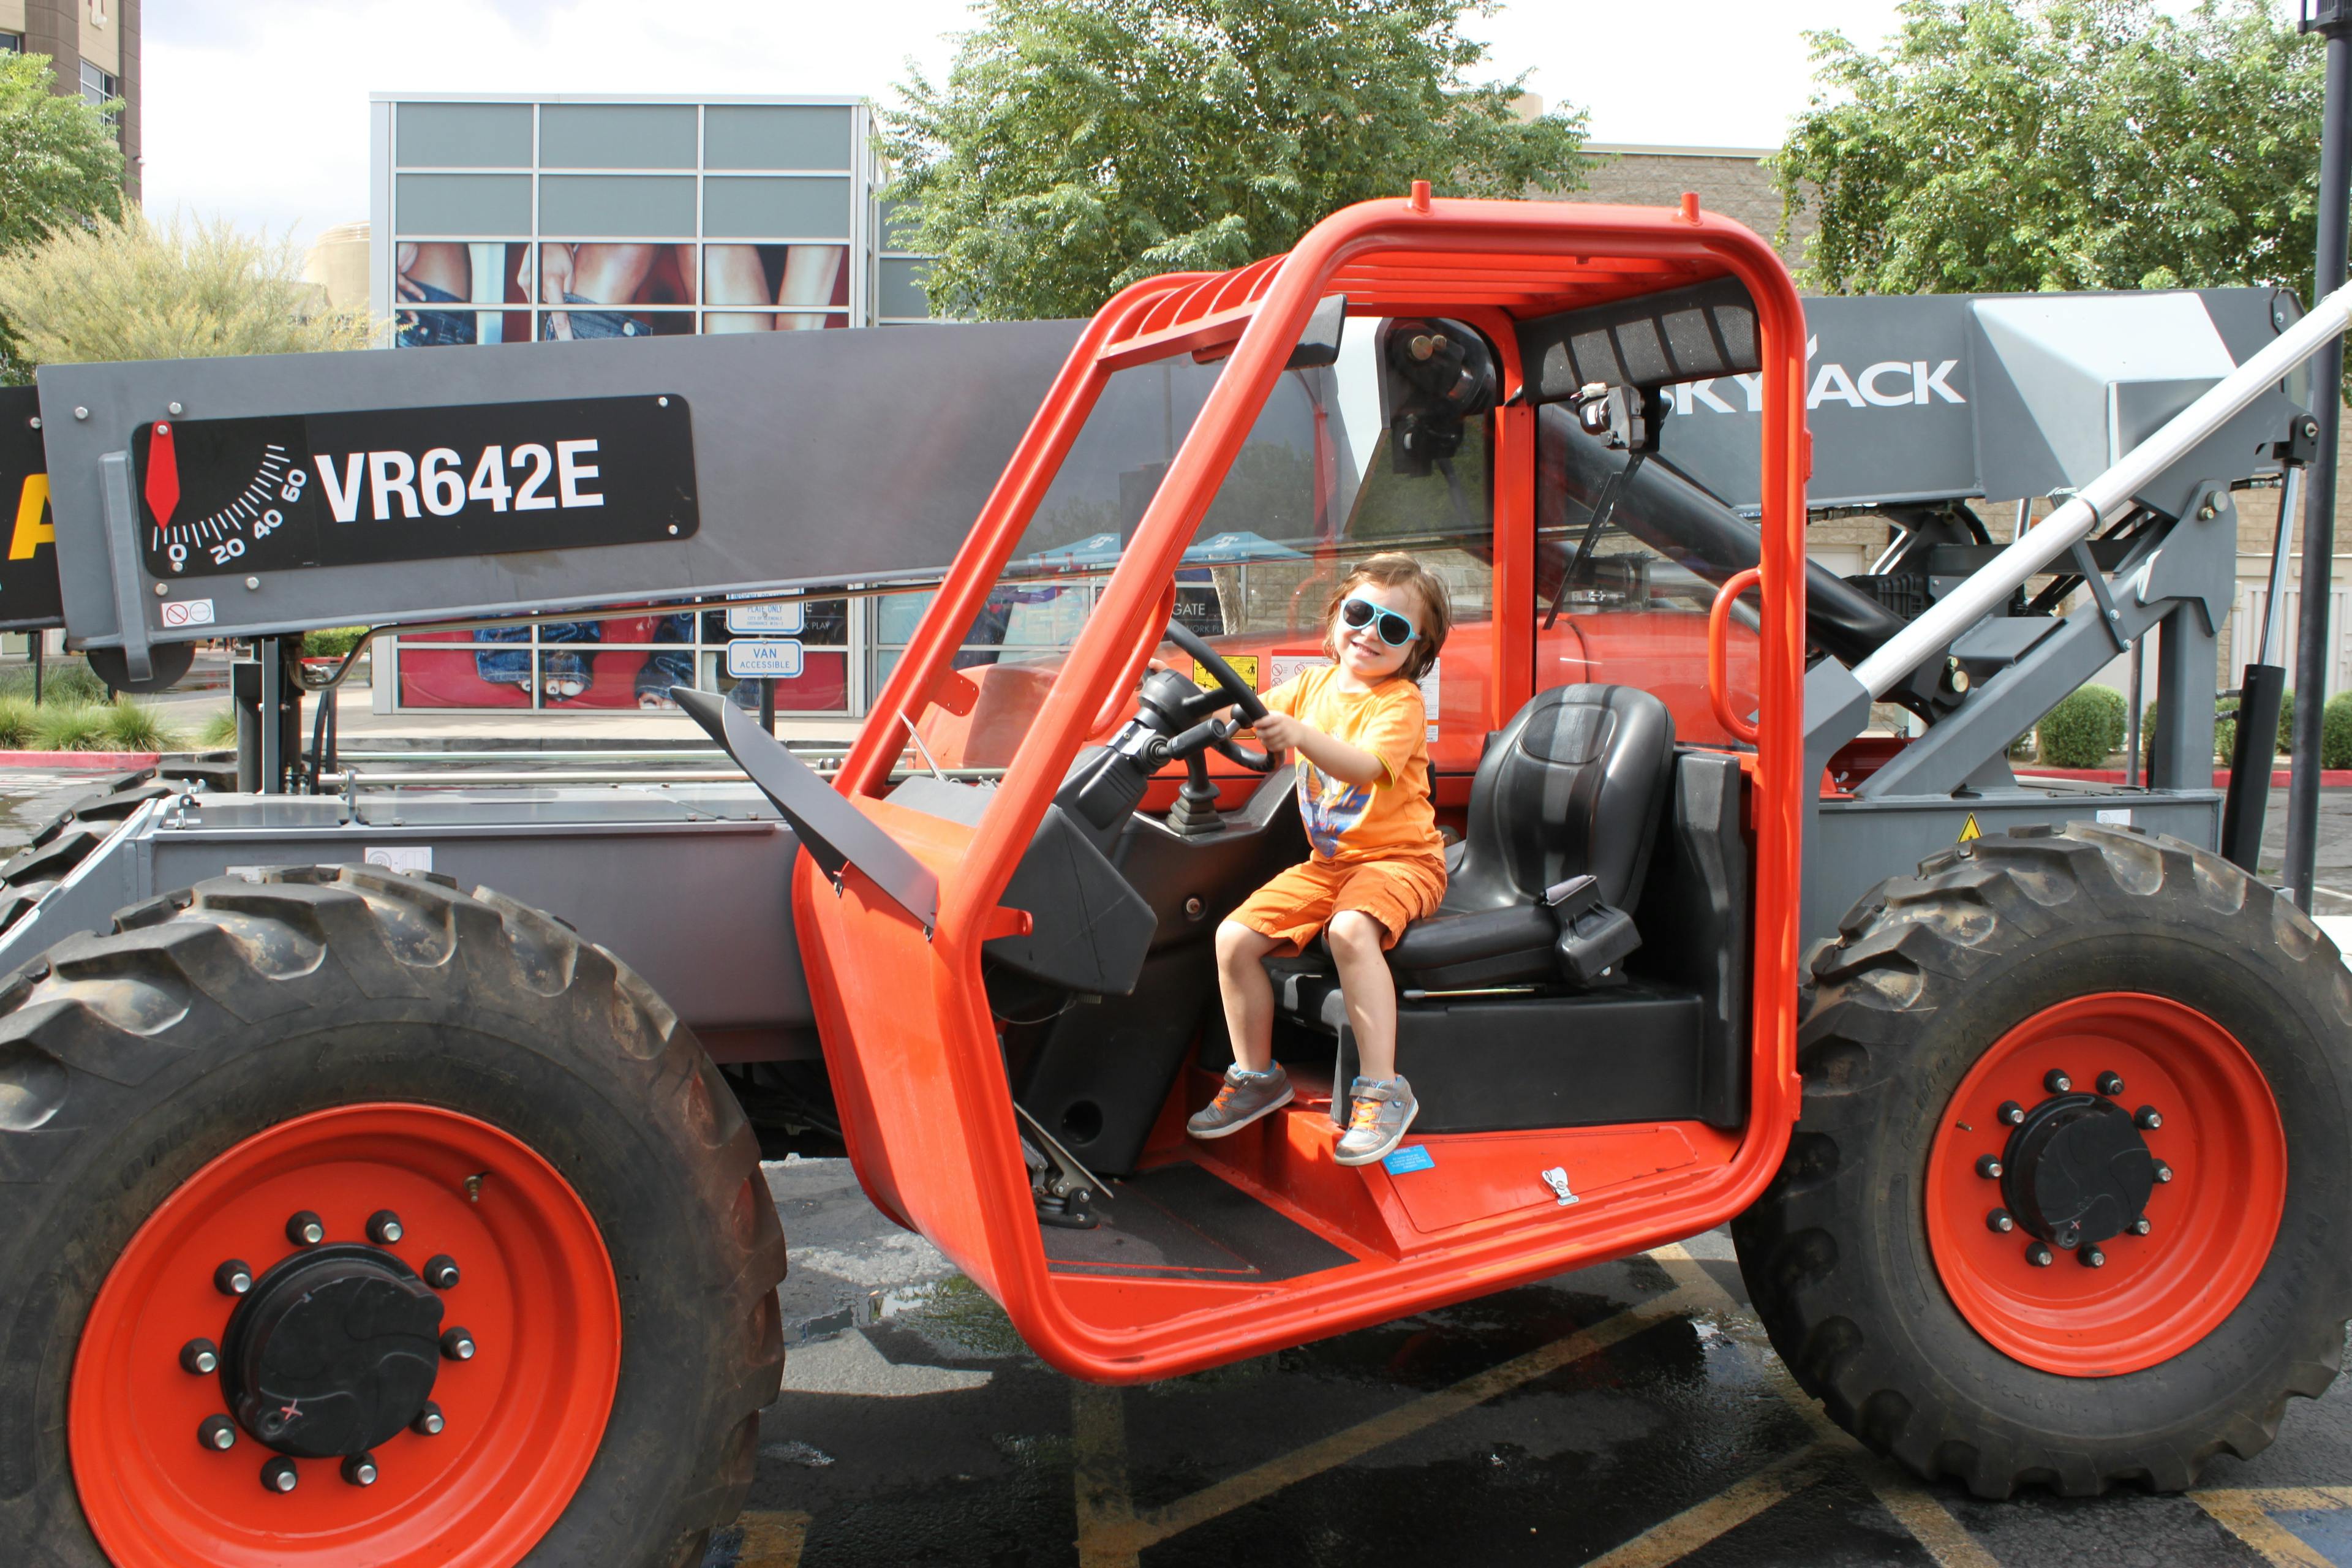 Skyjack Brings the Fun to Touch a Truck Event in Arizona | Industry News